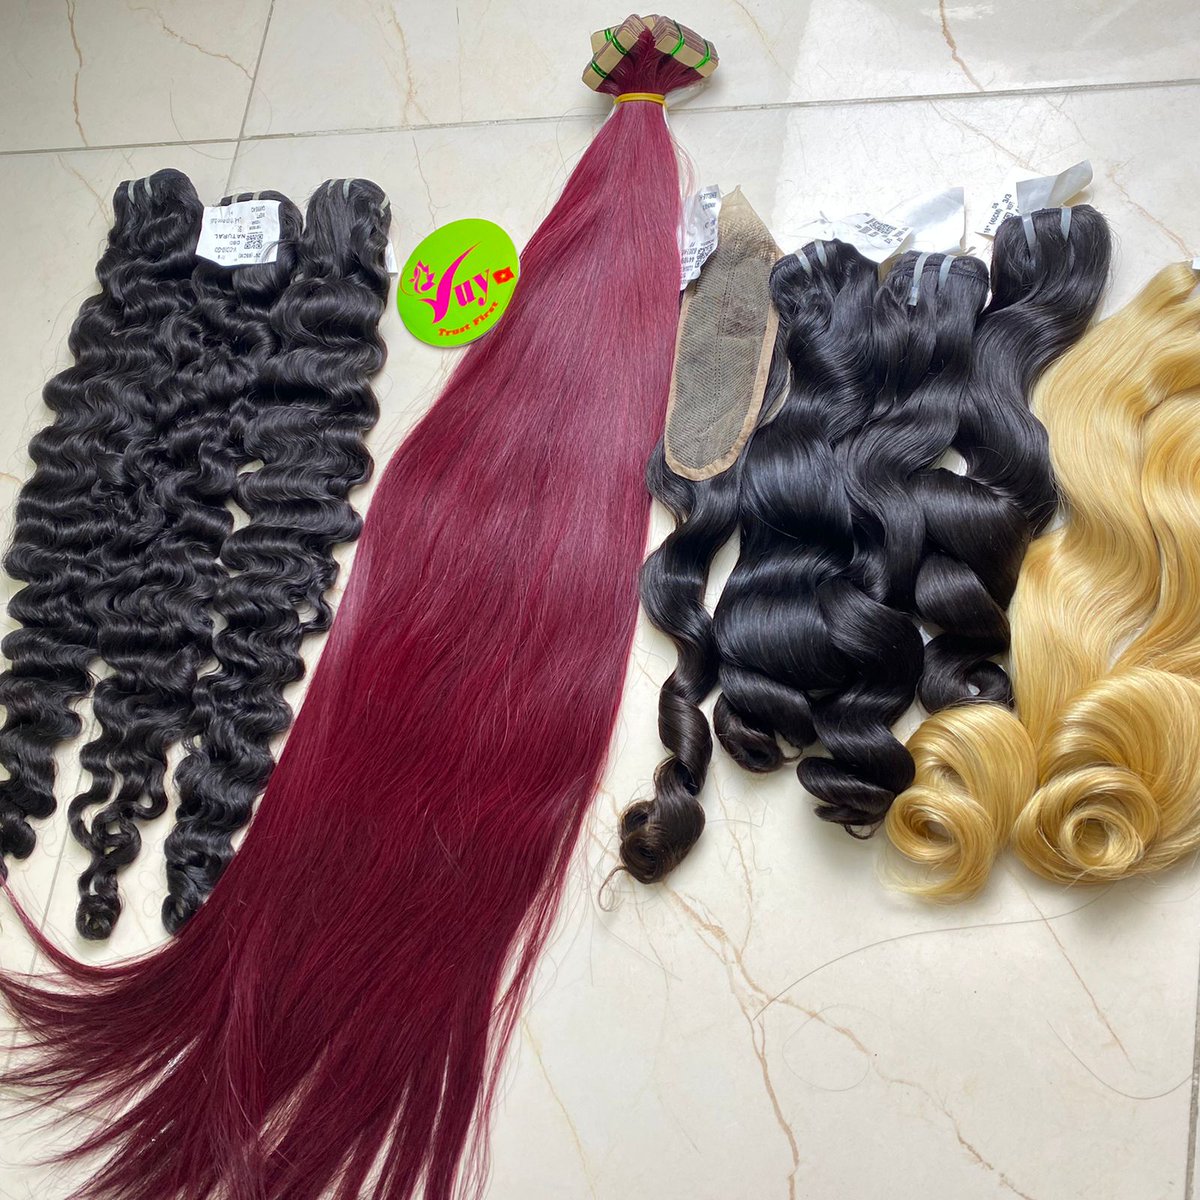 Order Shipping today 😍 🥰Contact With Me On Whatsapp +84396092128 #RawHairExtensions #NaturalHairExtensions #RawVirginHair #UnprocessedHair #RawHairVendor #HairExtensions #HairWeaves #RawIndianHair #VirginHairExtensions #RealHairExtensions #RawHairBundle #LuxuryHairExtensions